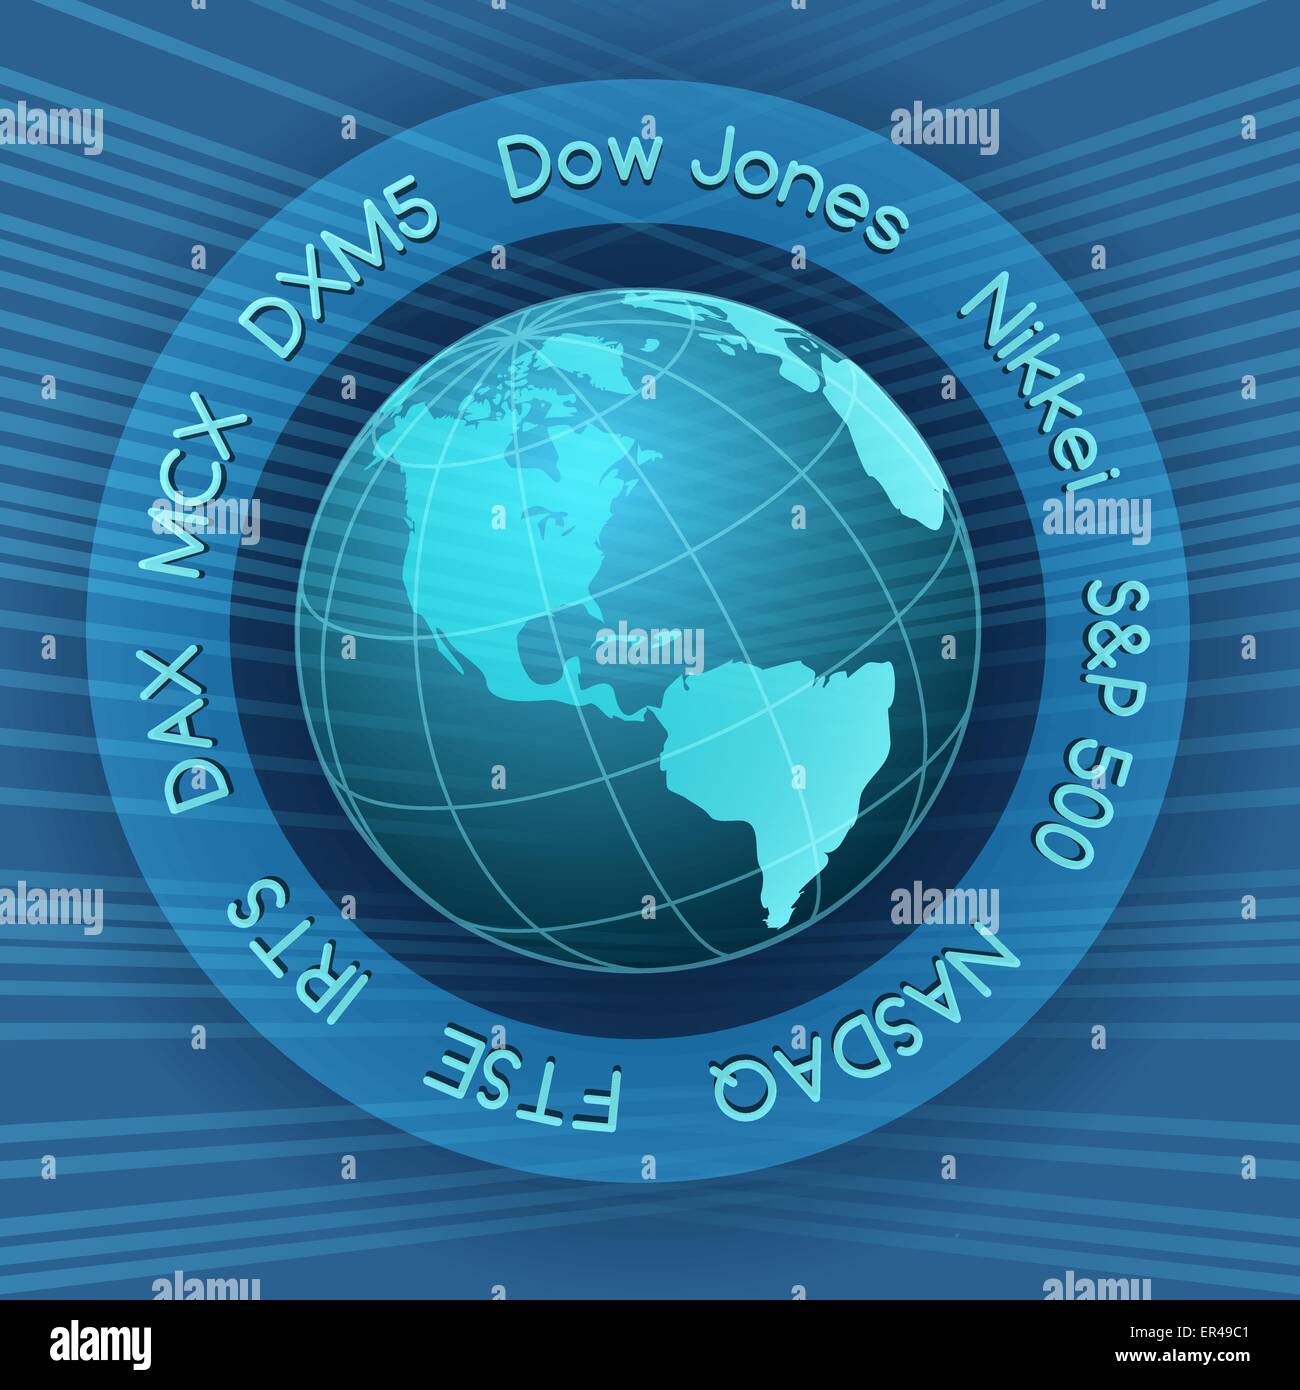 Globe in the ring of main financial and economy indexes. Only free font used. Stock Vector